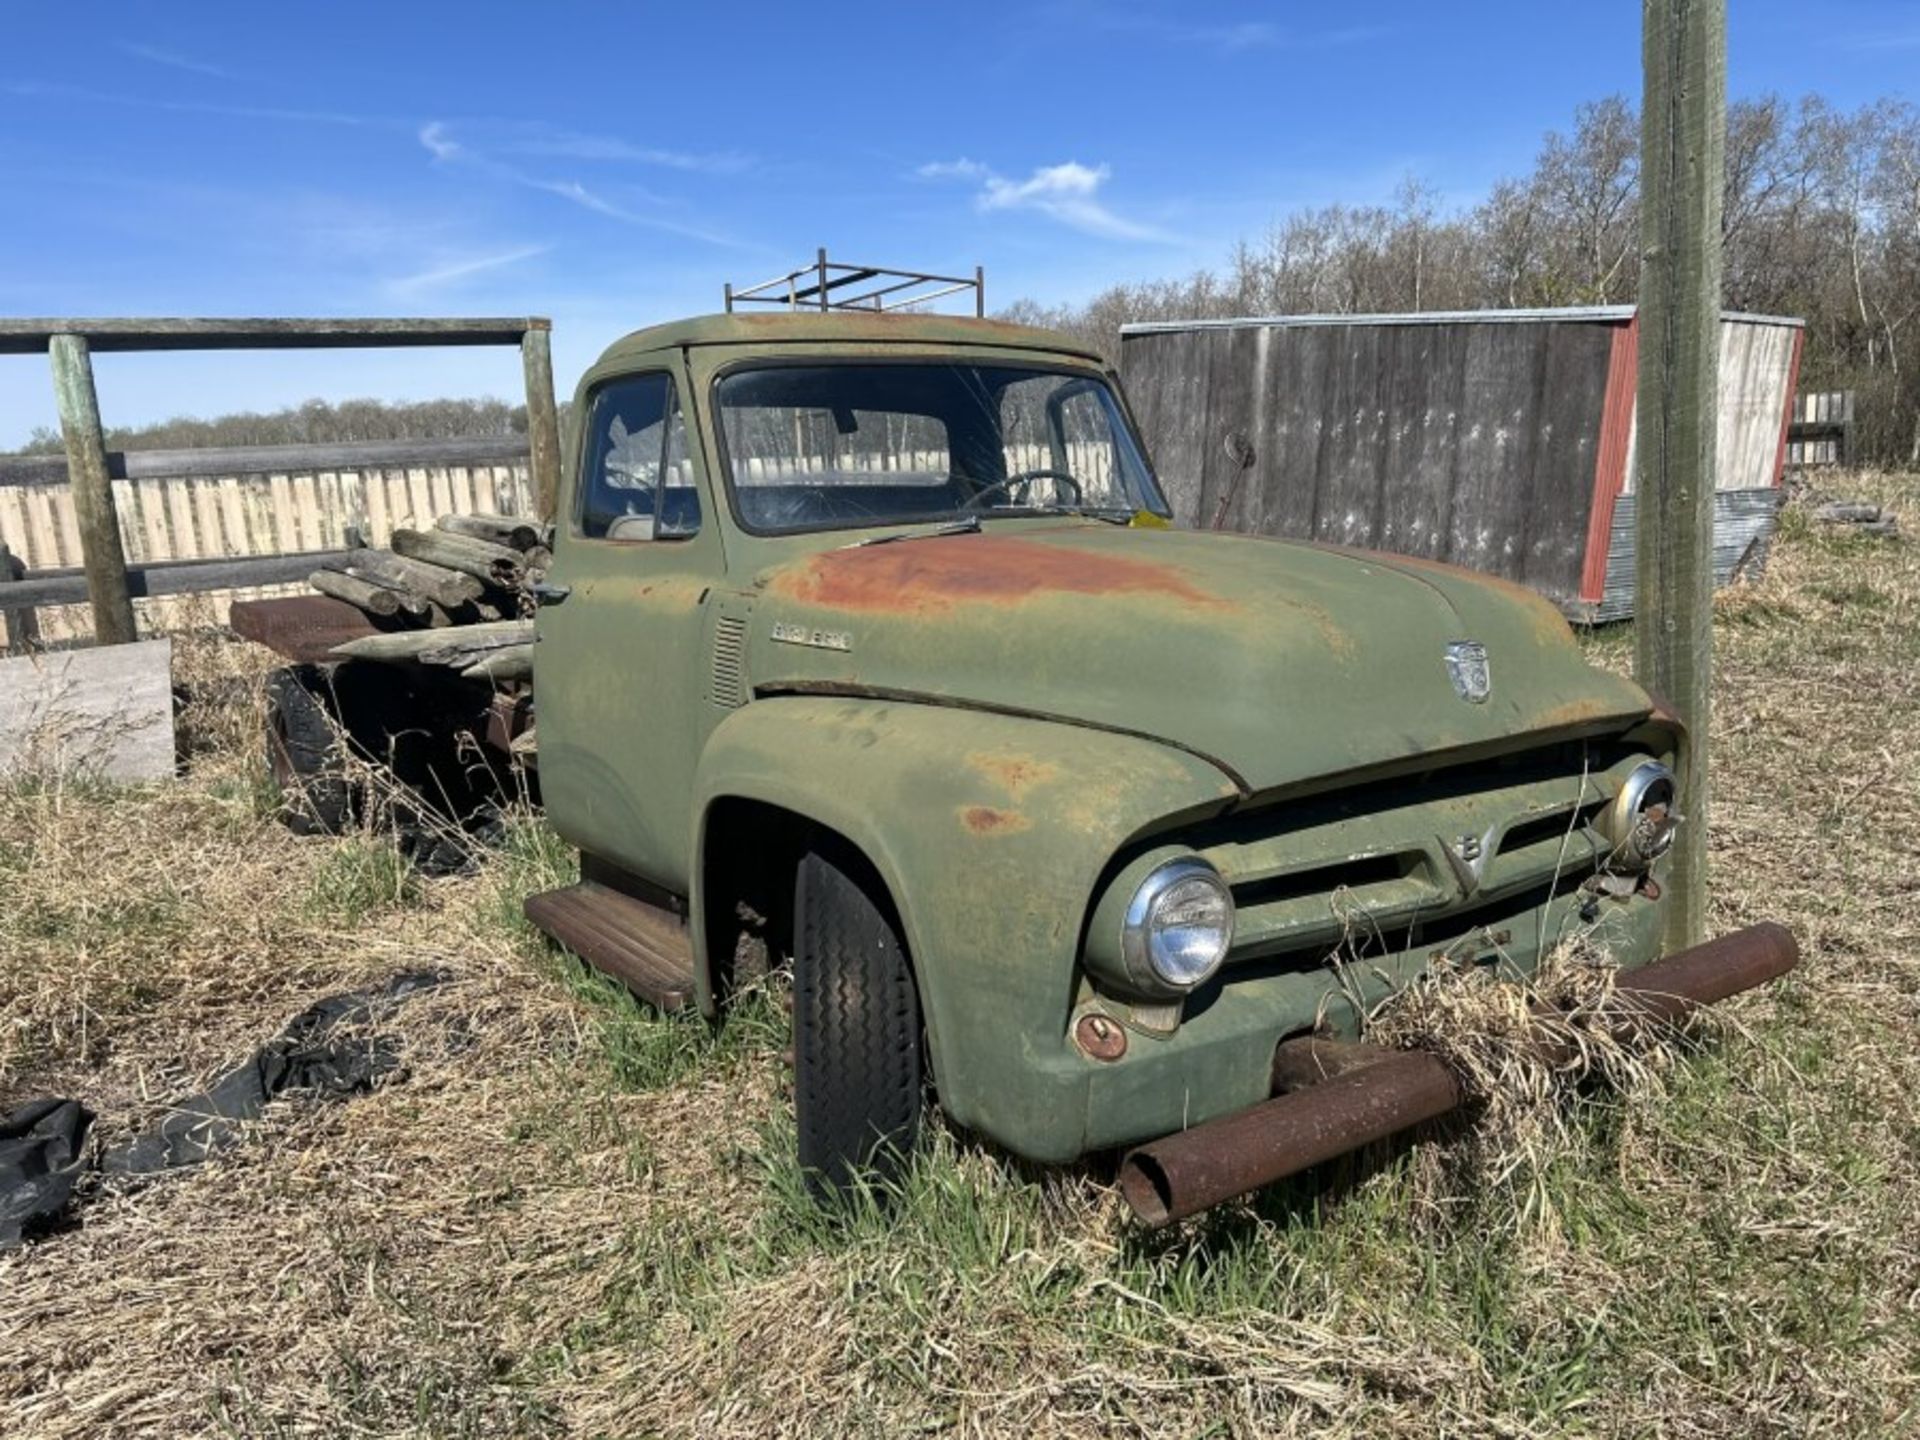 1956 FORD F600 CAB & CHASSIS W/STD TRANS, V8 ENG. (PROJECT) - LOCATED 22 KM EAST OF PONOKA - Image 2 of 7